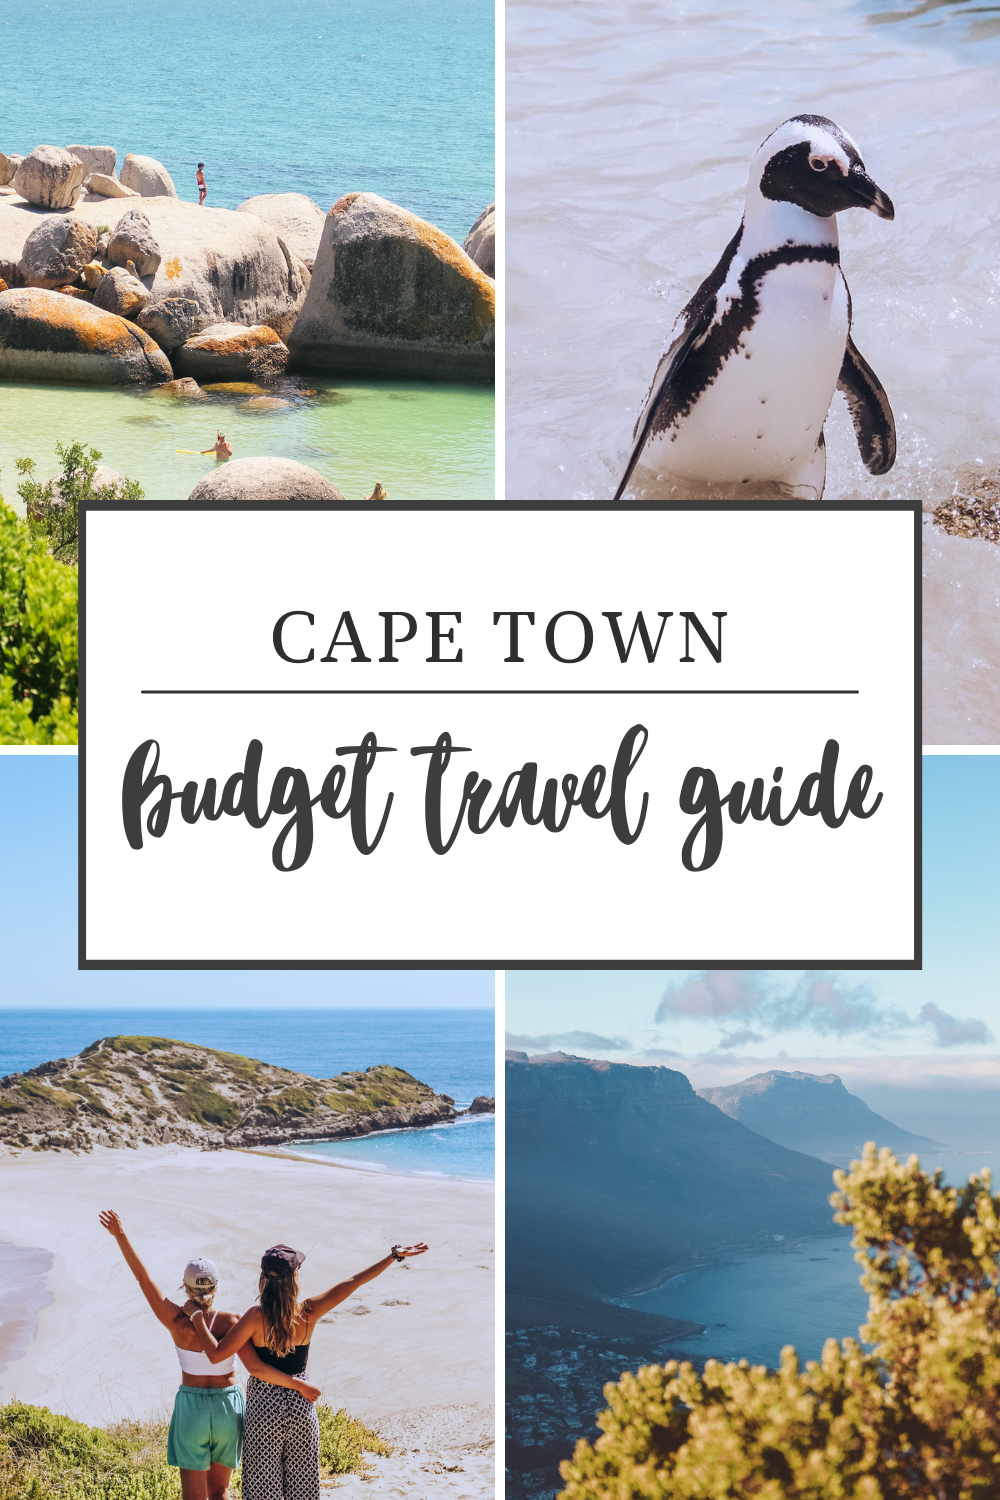 spellbound travels cape town budget travel guide